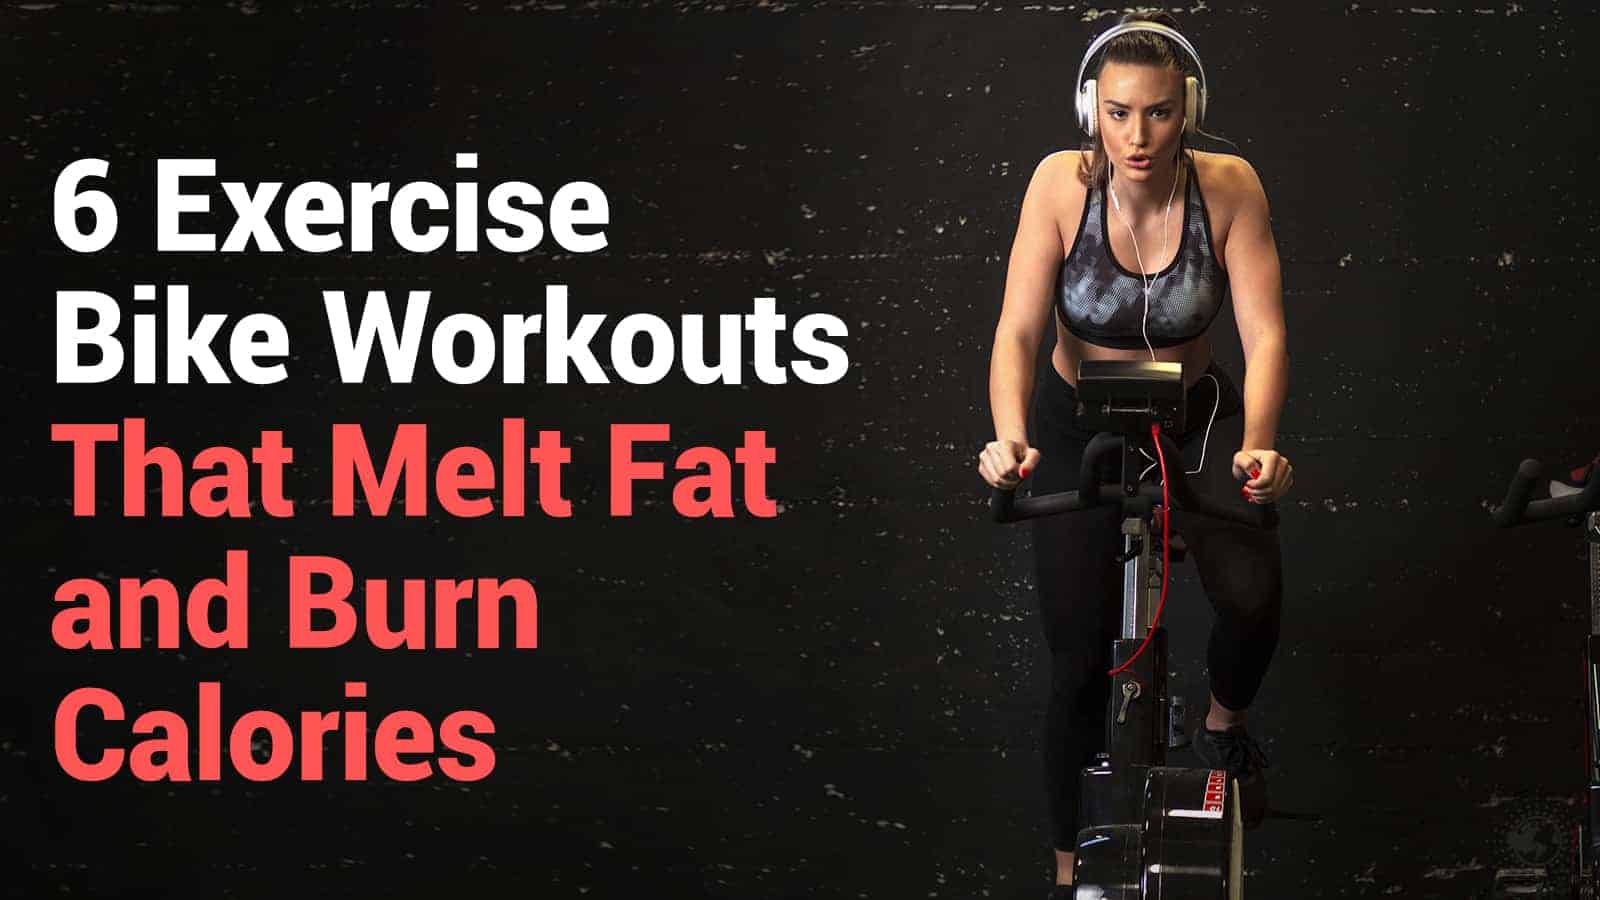 6 Exercise Bike Workouts That Melt Fat and Burn Calories